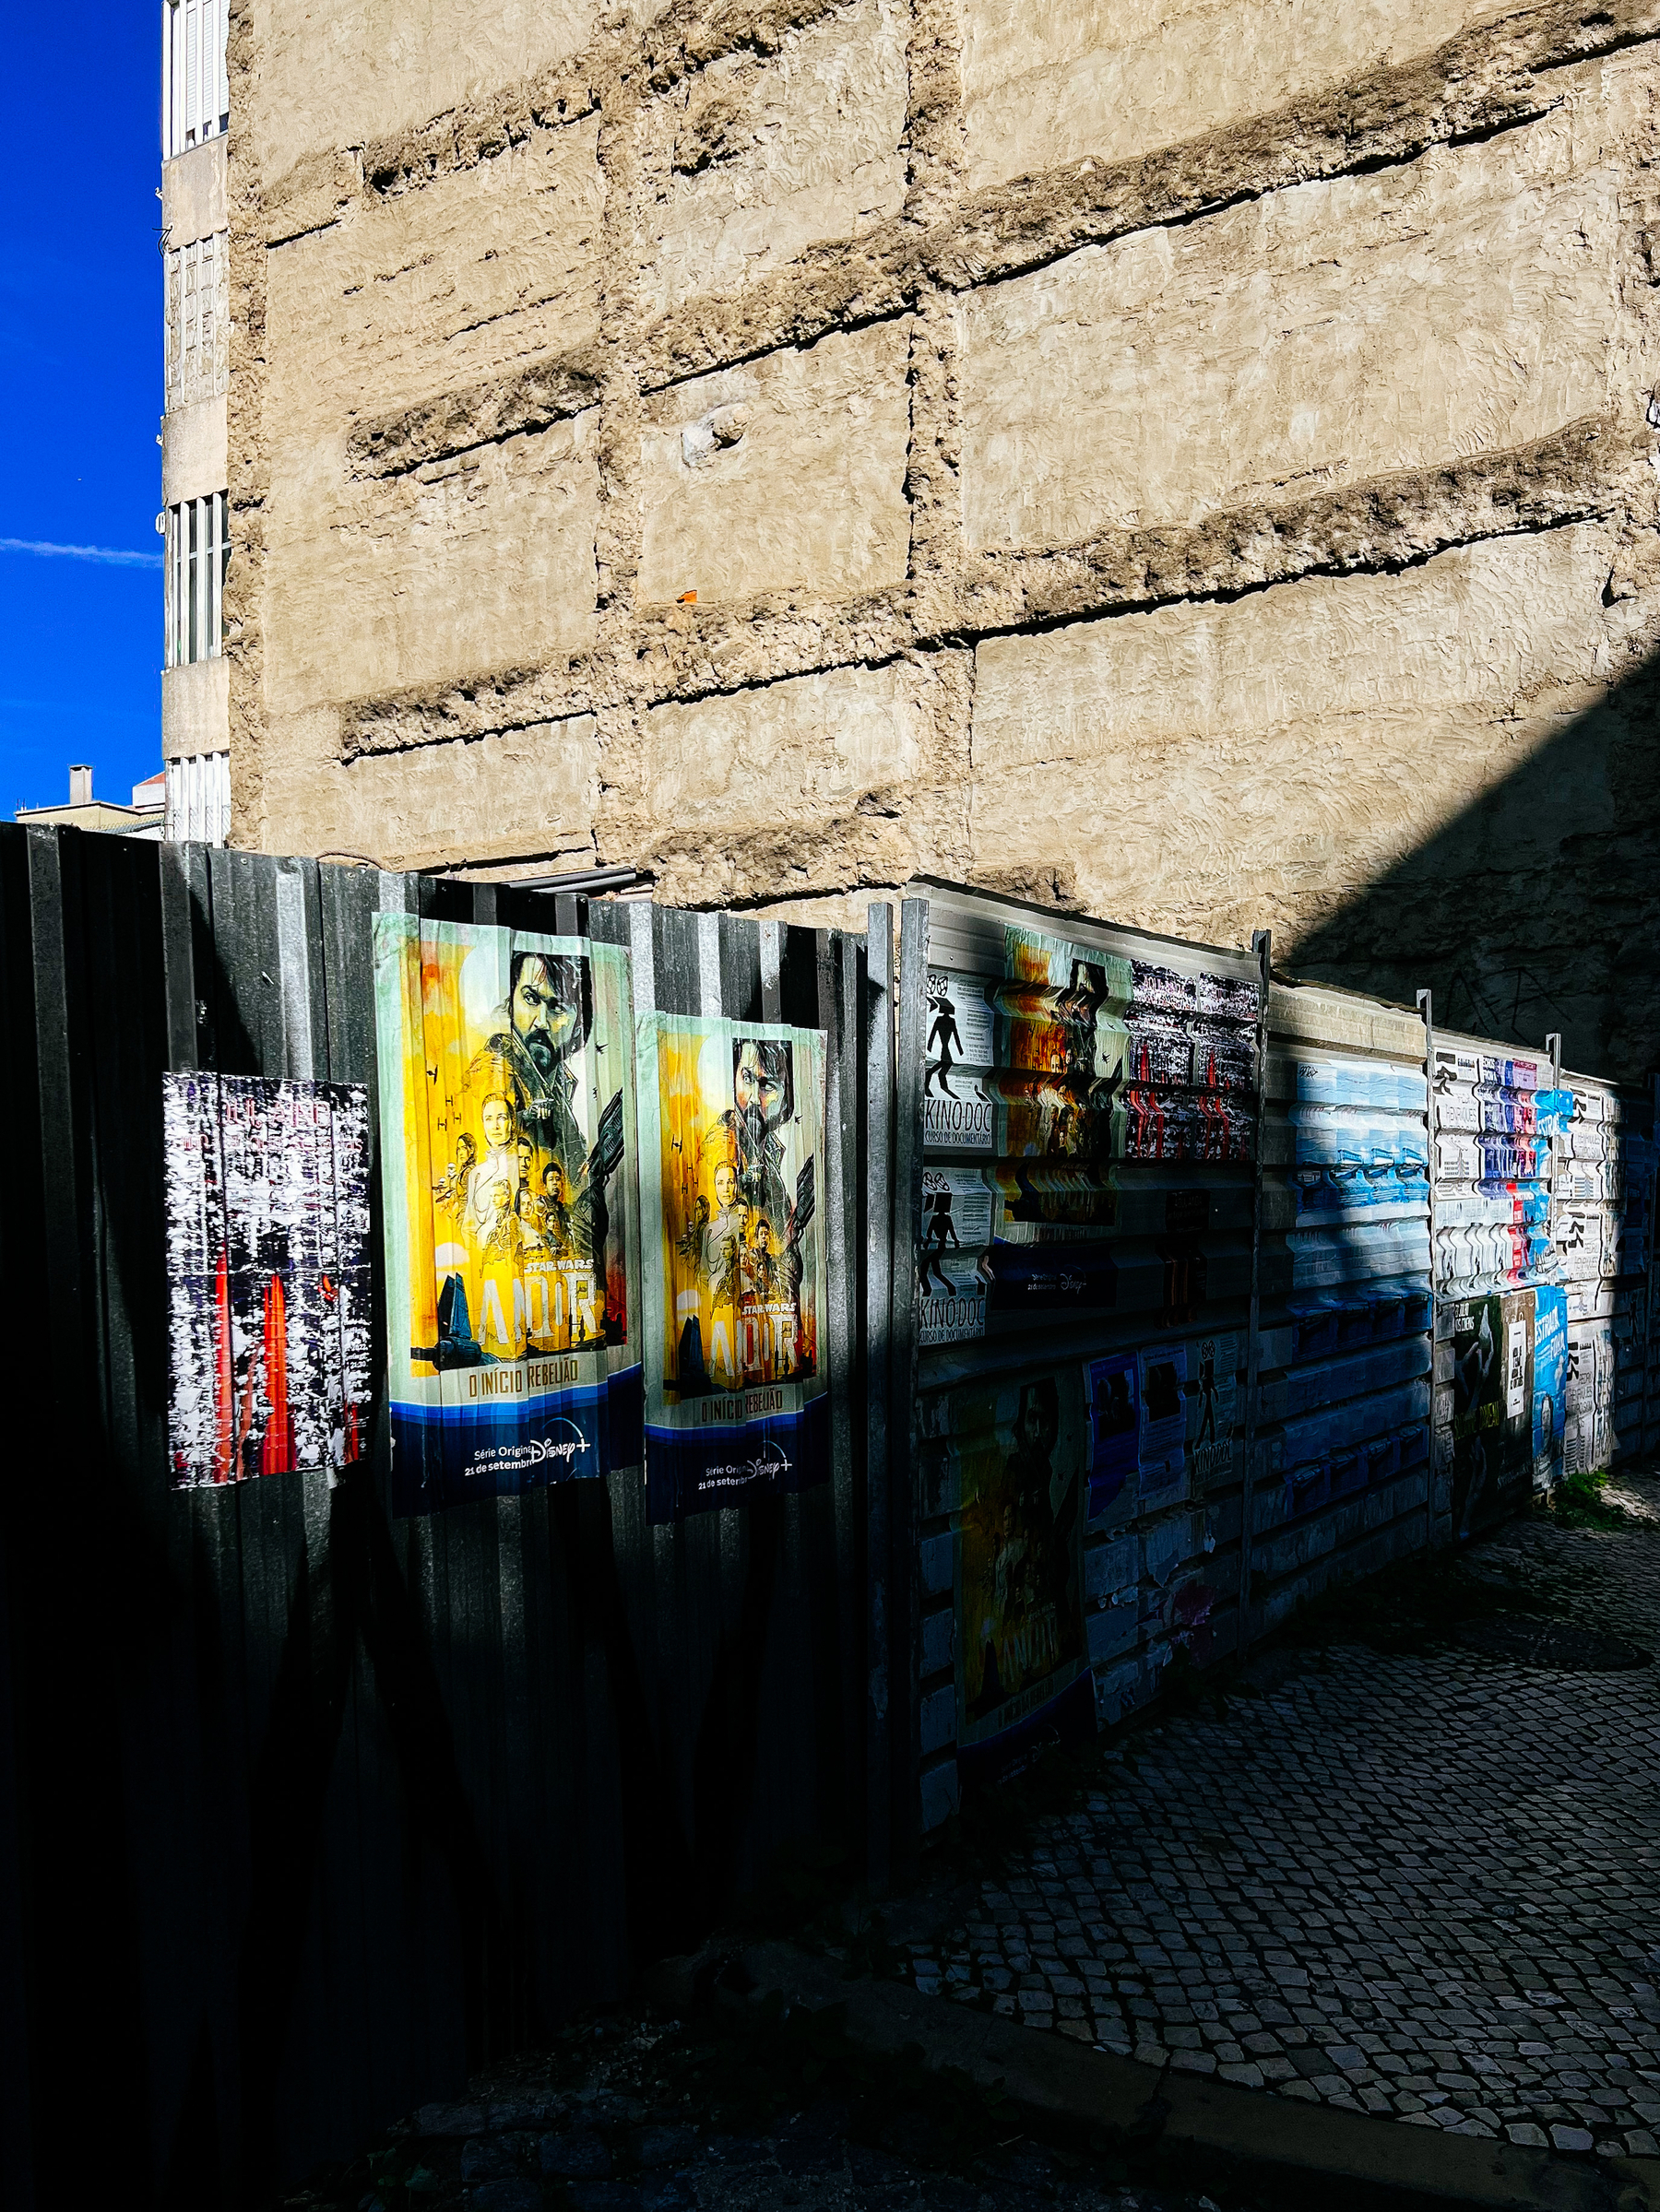 Posters on a fence, in front of a derelict building 